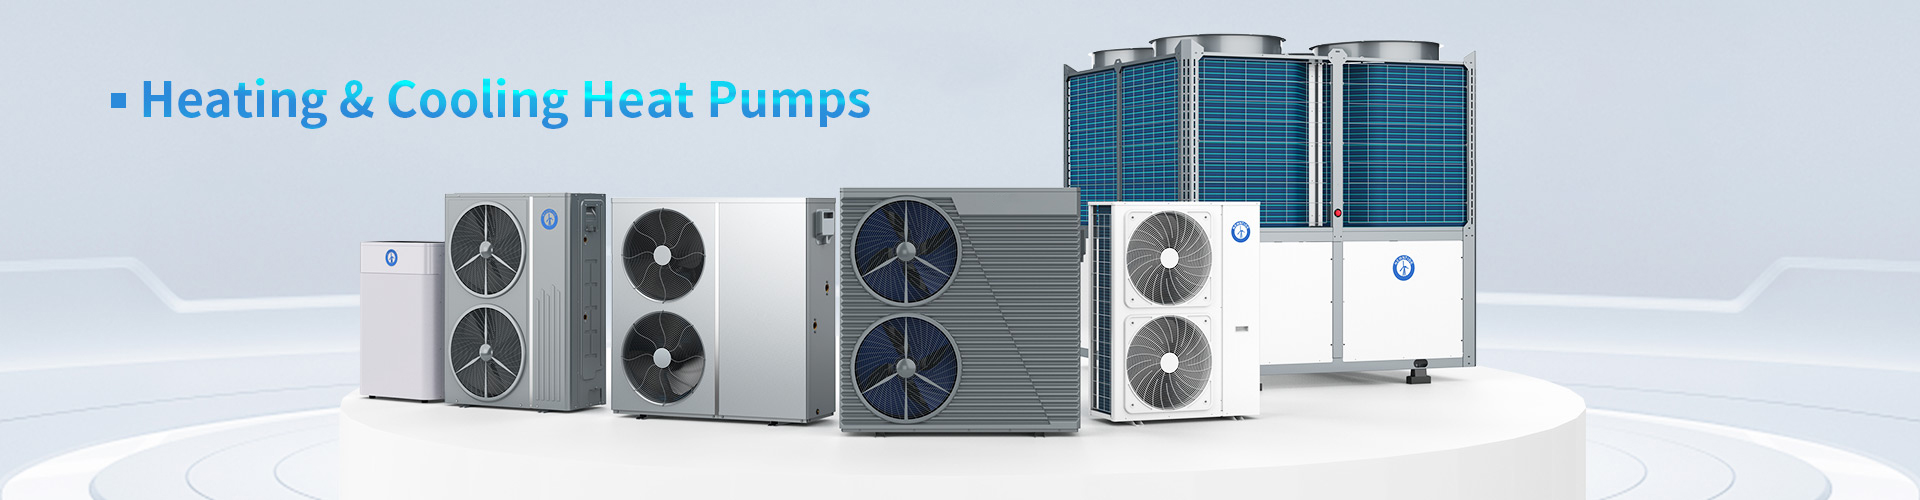 NEWNTIDE-Heating-&-Cooling-Heat-Pump2